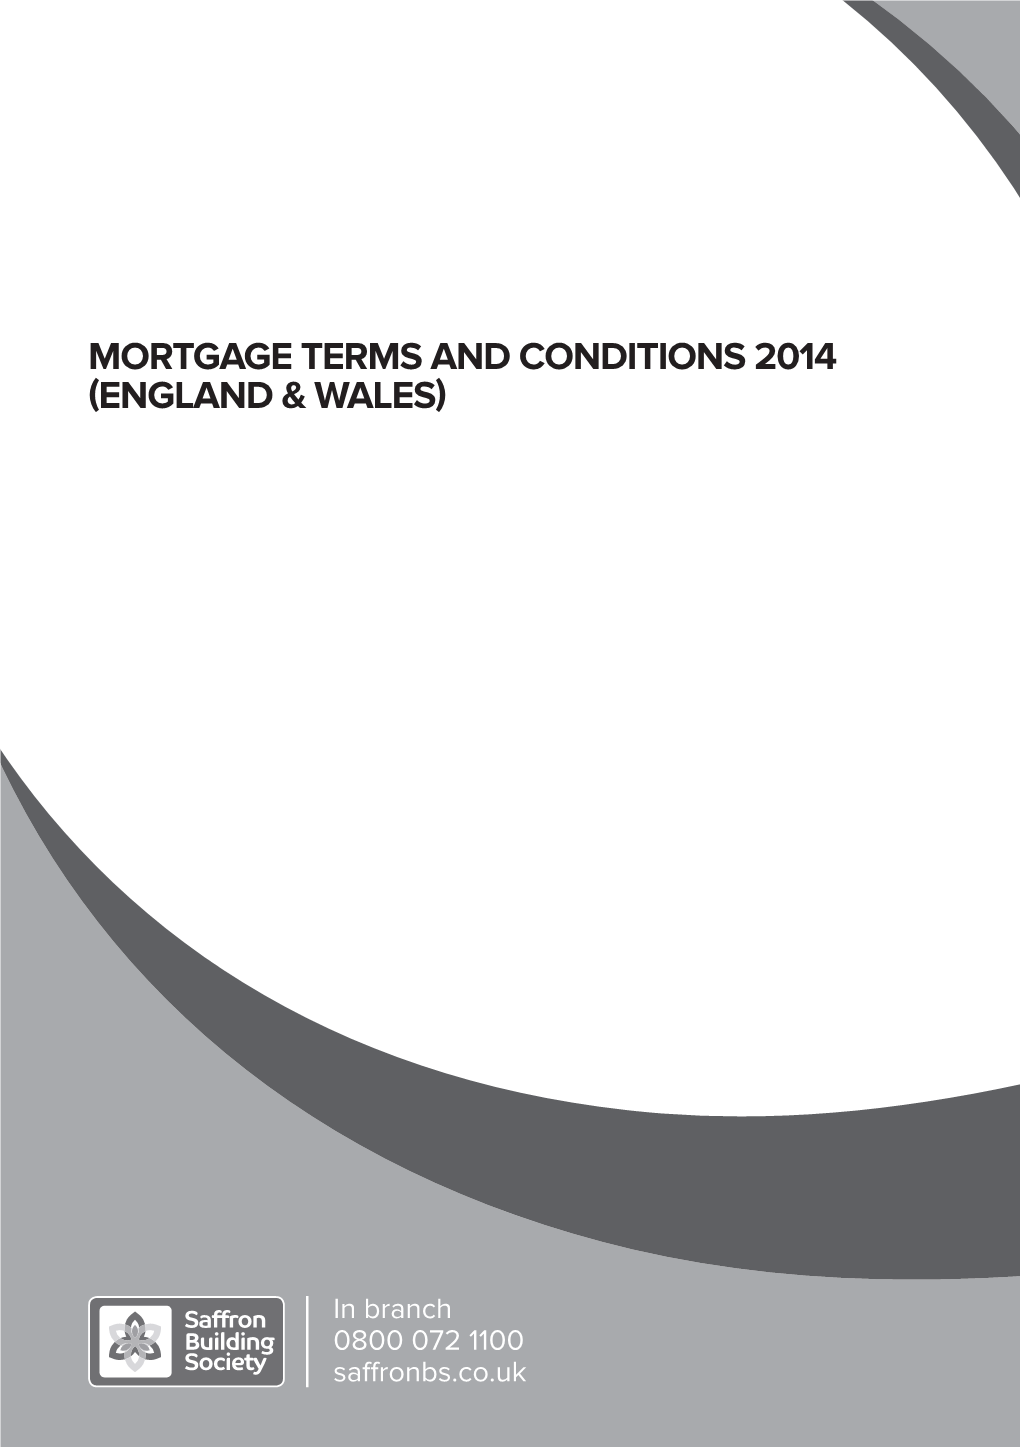 Mortgage Terms and Conditions 2014 (England & Wales)